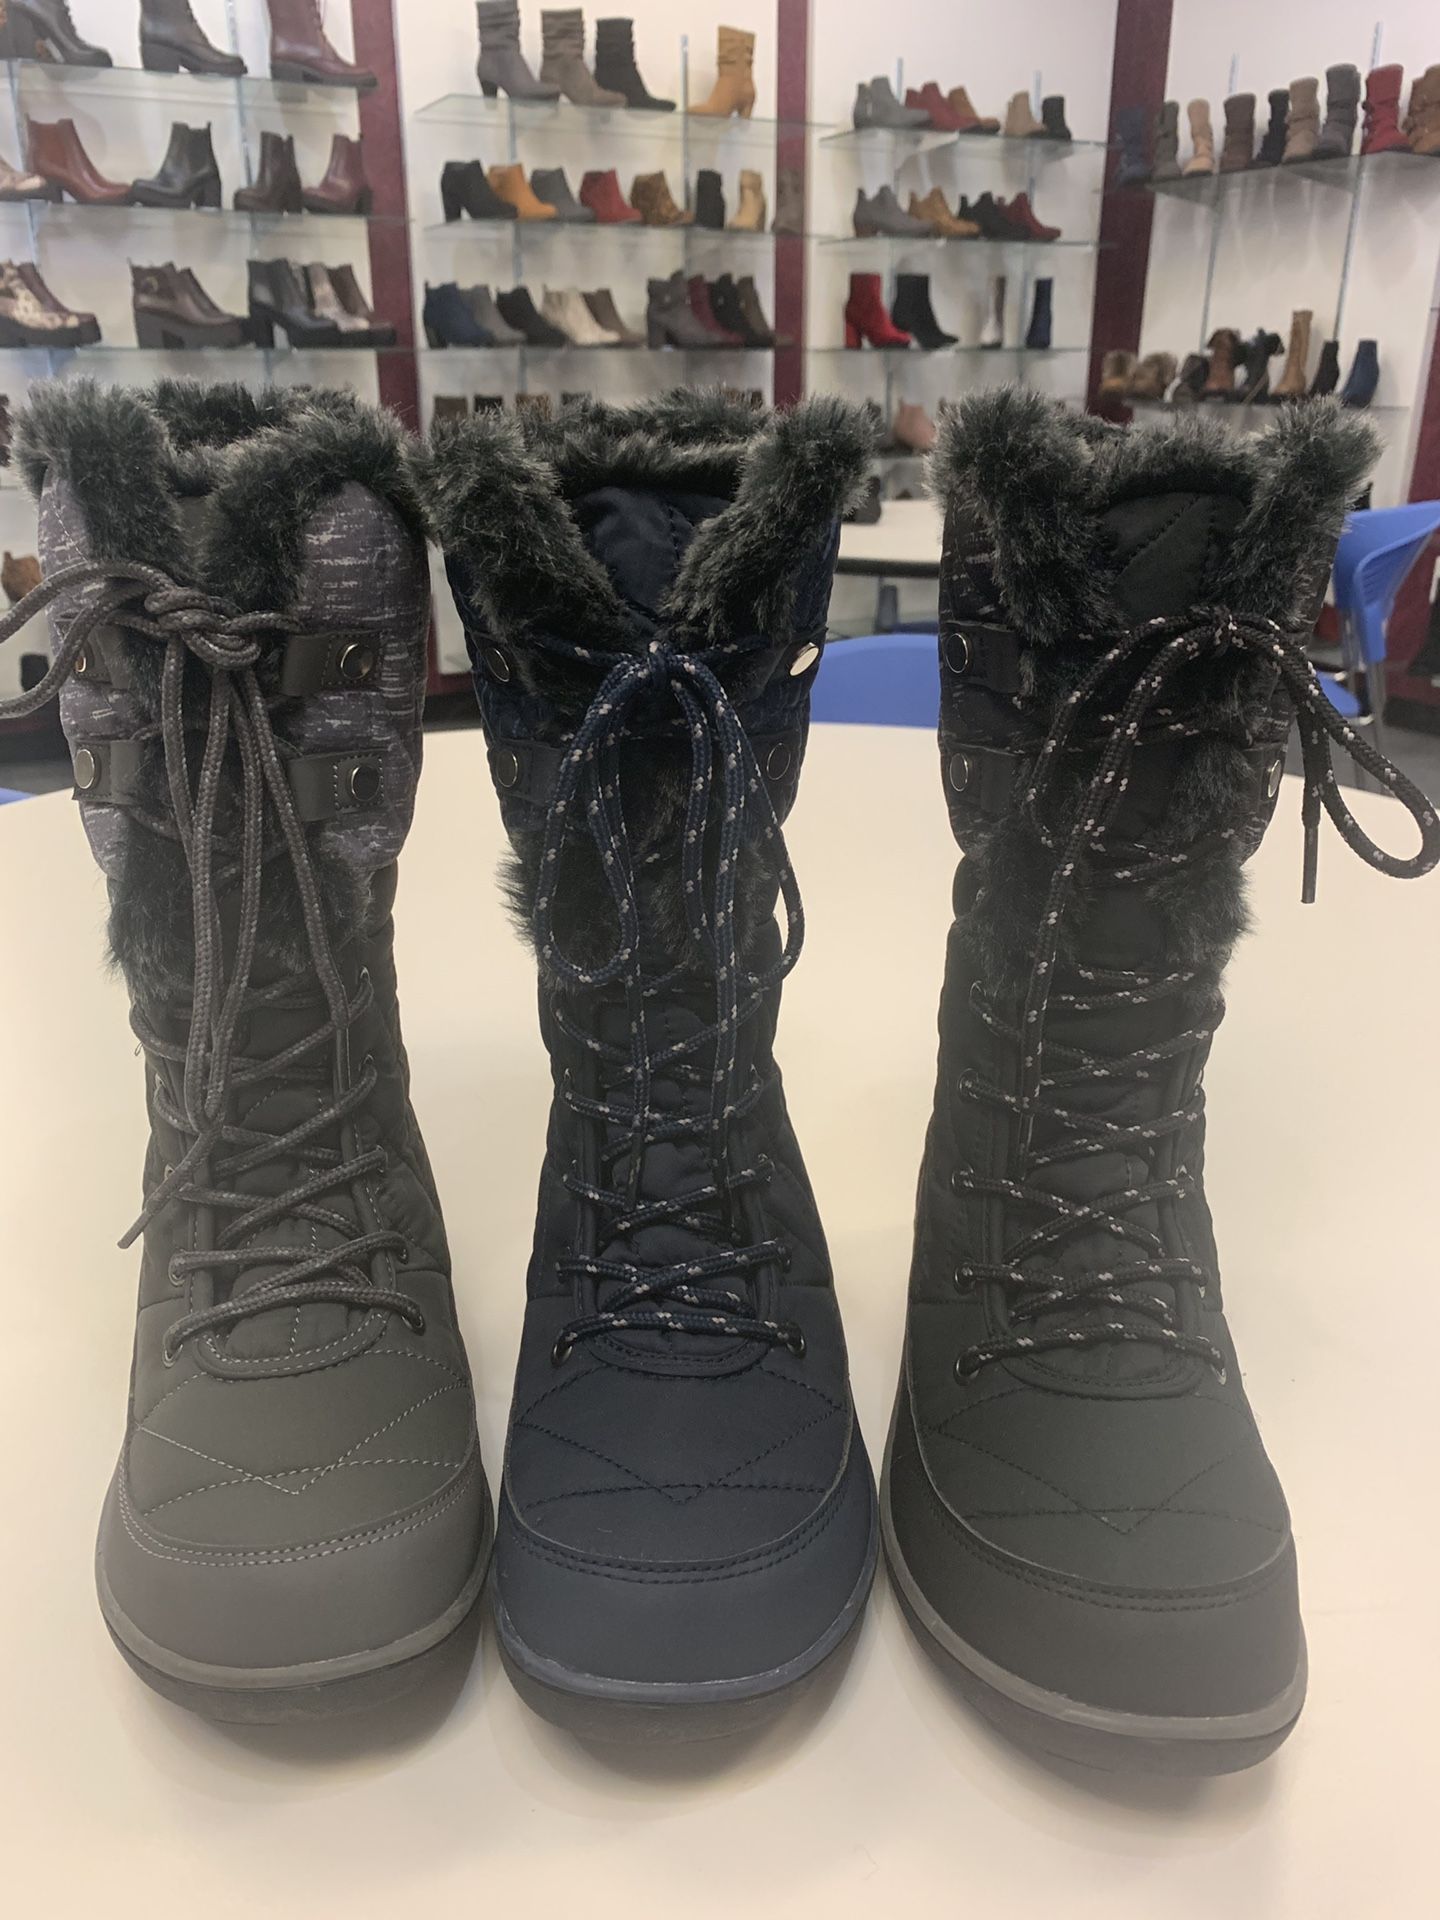 Snow boots for women sizes available